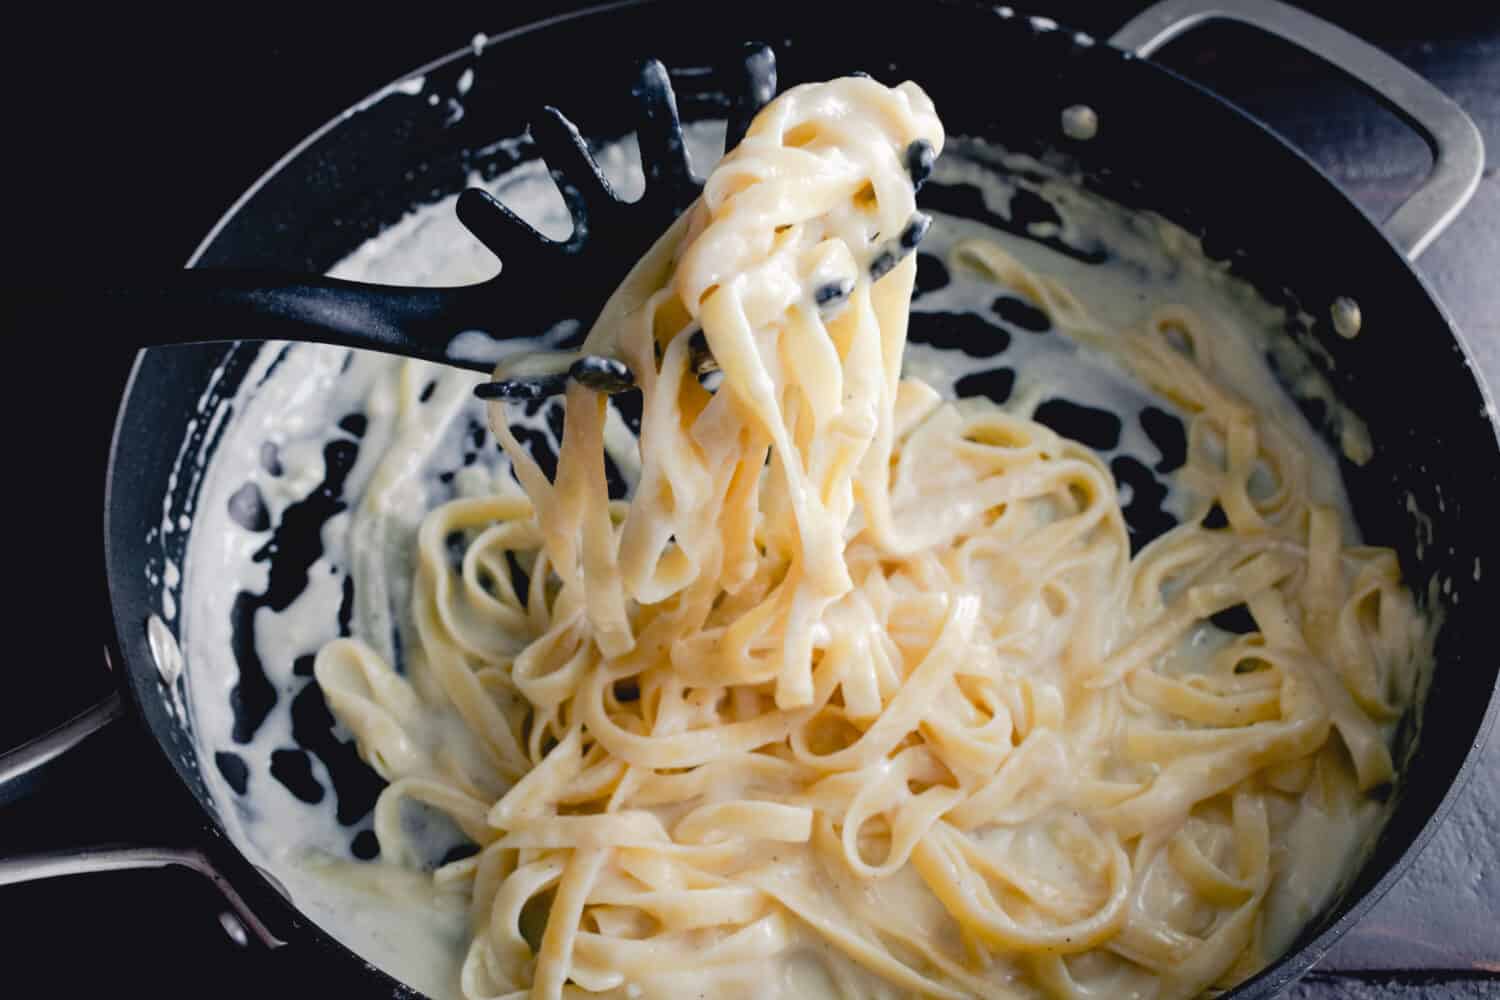 Fettuccine Alfredo in a Saute Pan: Freshly made noodles in a creamy parmesan cheese sauce